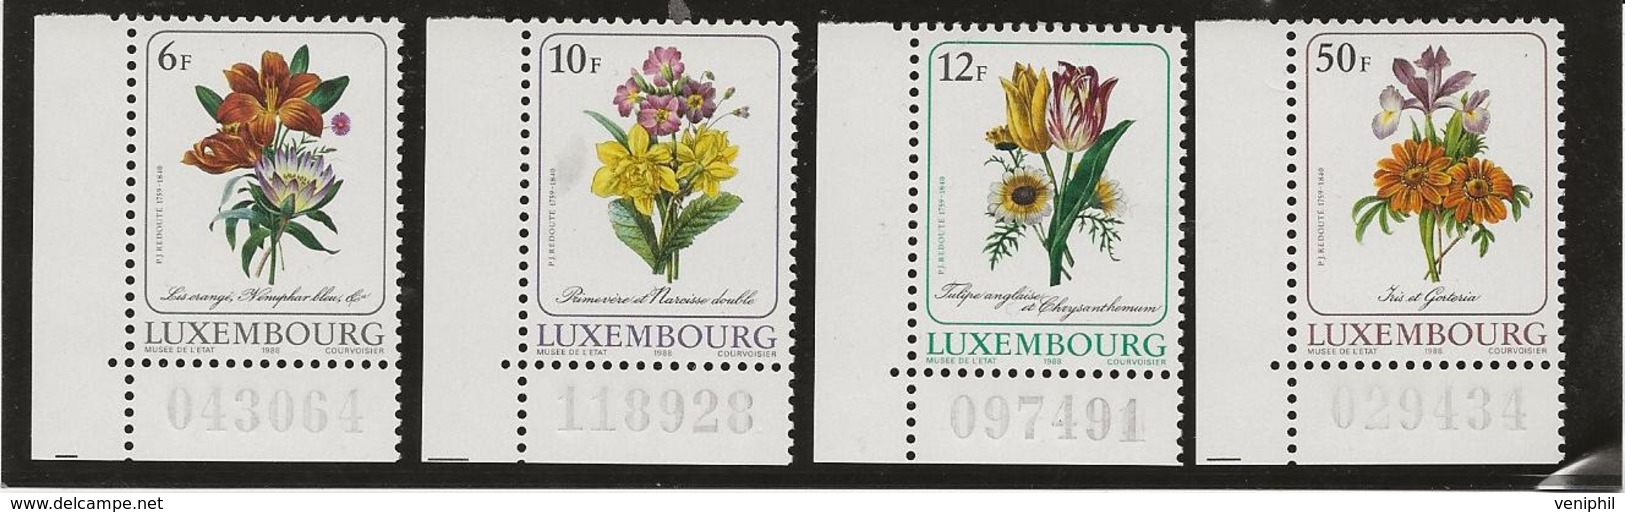 LUXEMBOURG - SERIE FLEURS N° 1140 A 1143 -NEUVE SANS CHARNIERE -ANNEE 1988 - Unused Stamps